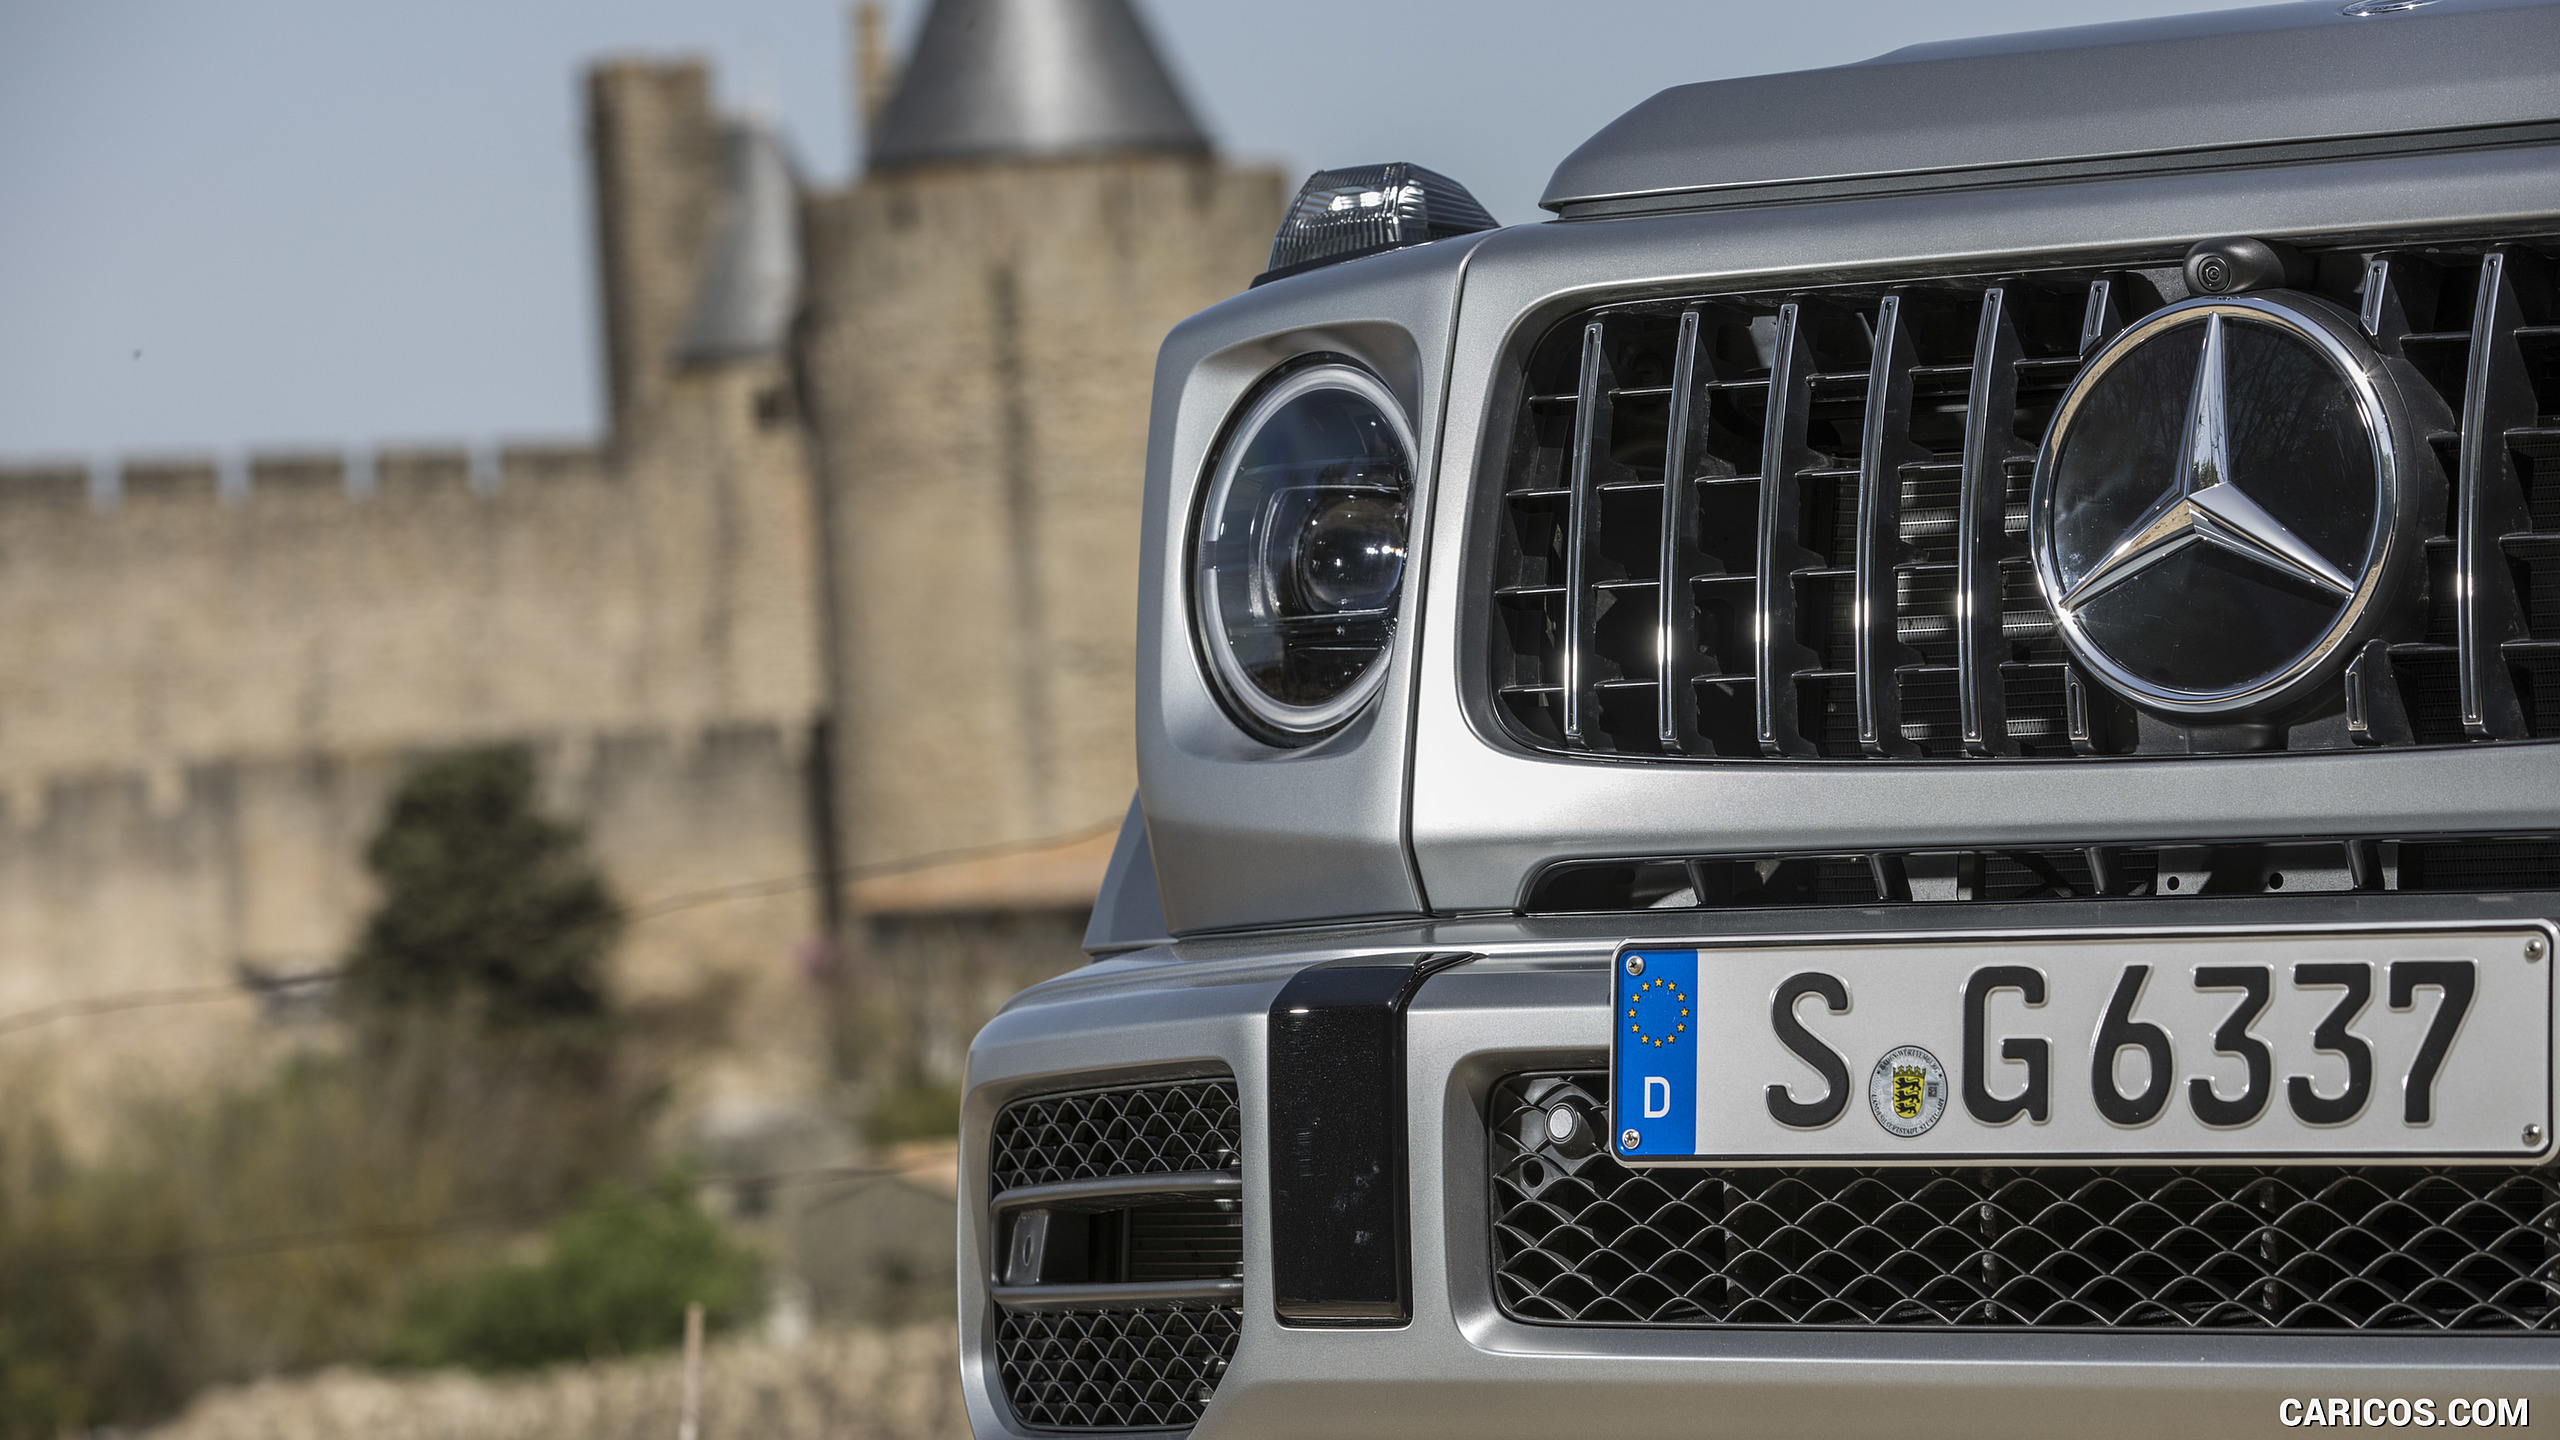 2019 Mercedes-AMG G63 - Grille, #172 of 452